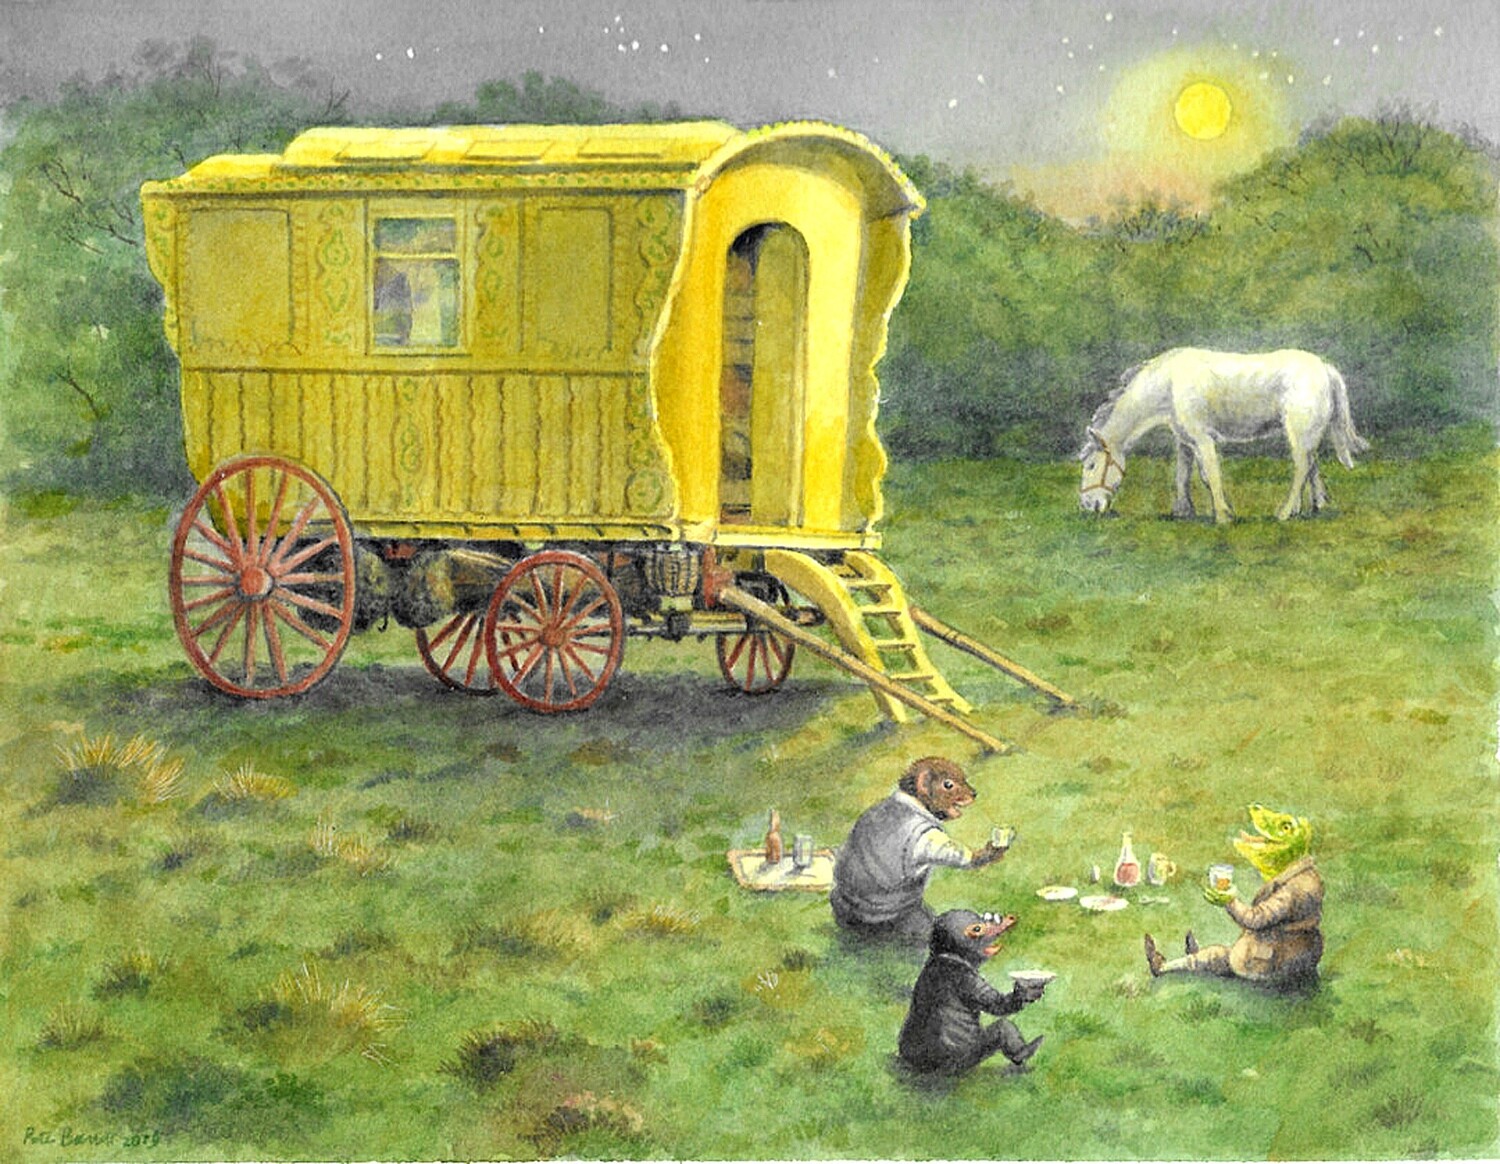 Toad With His Friends by the Caravan